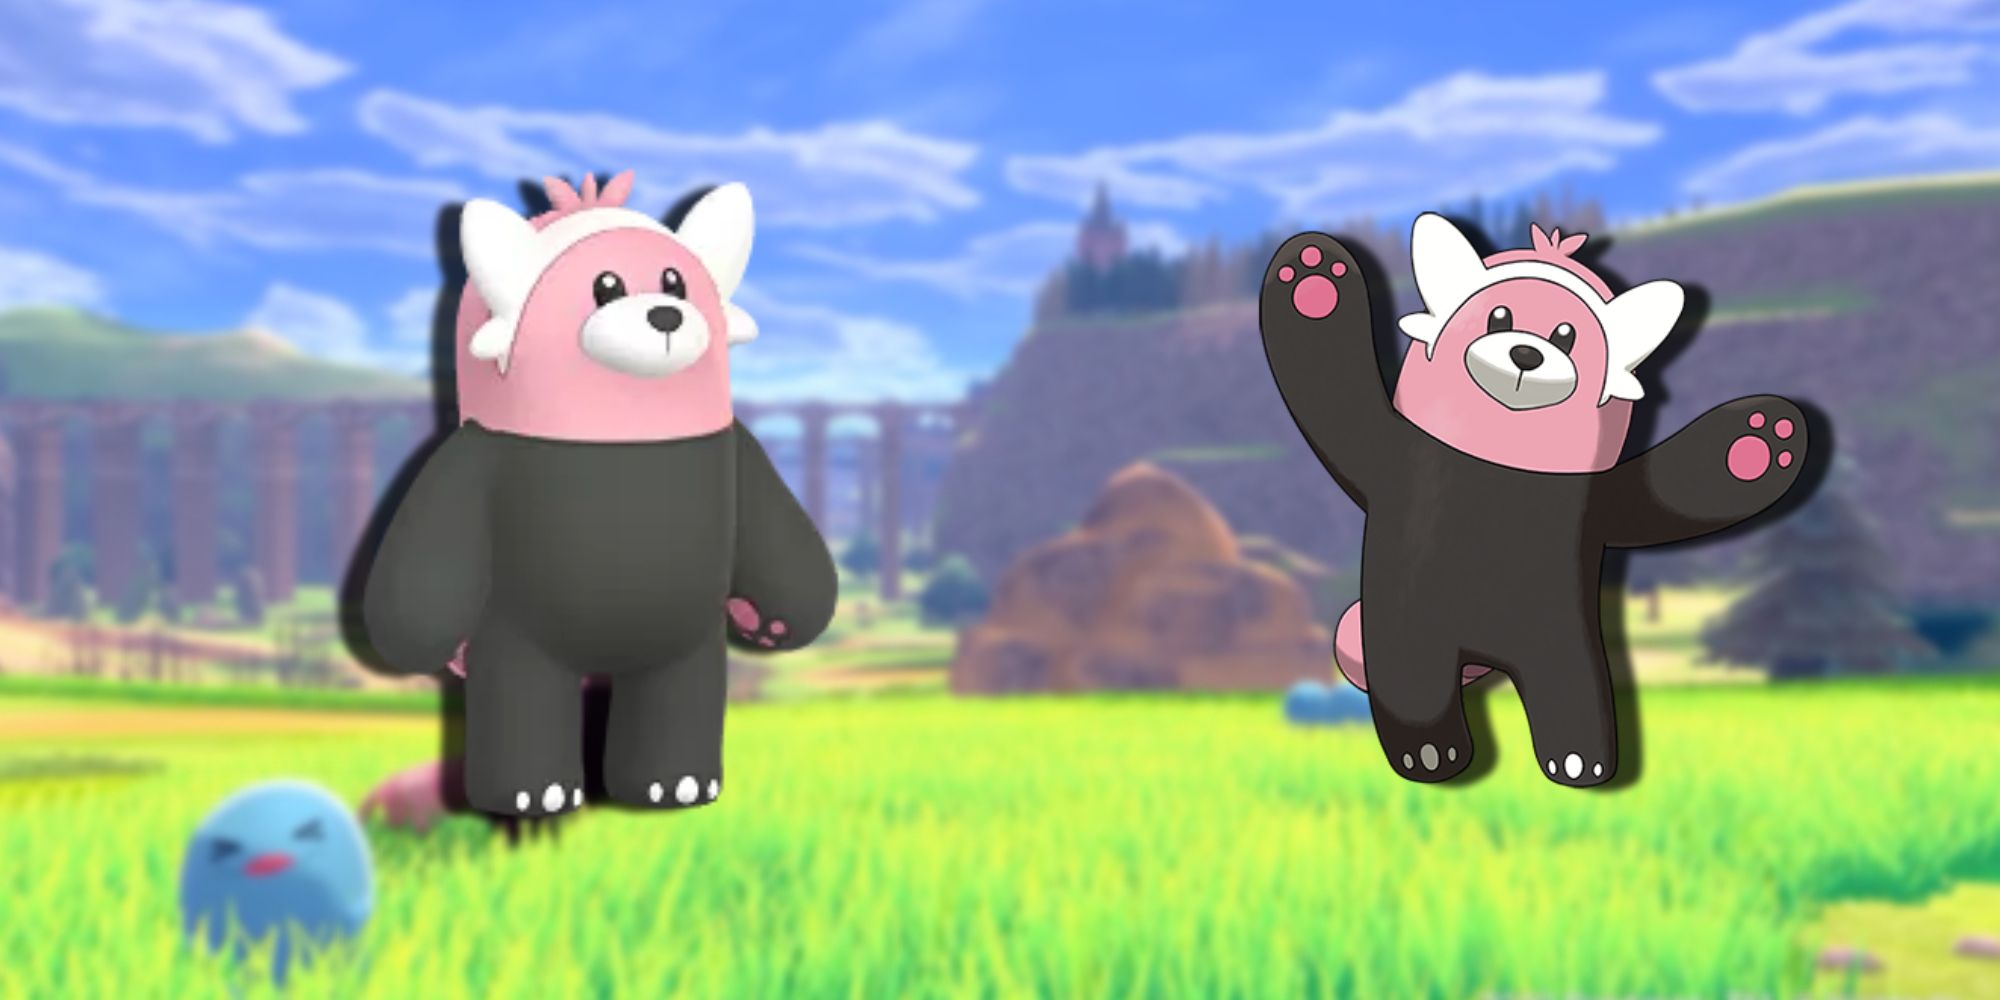 The pokemon Bewear is all kinds of cute but could easily crush a human to death